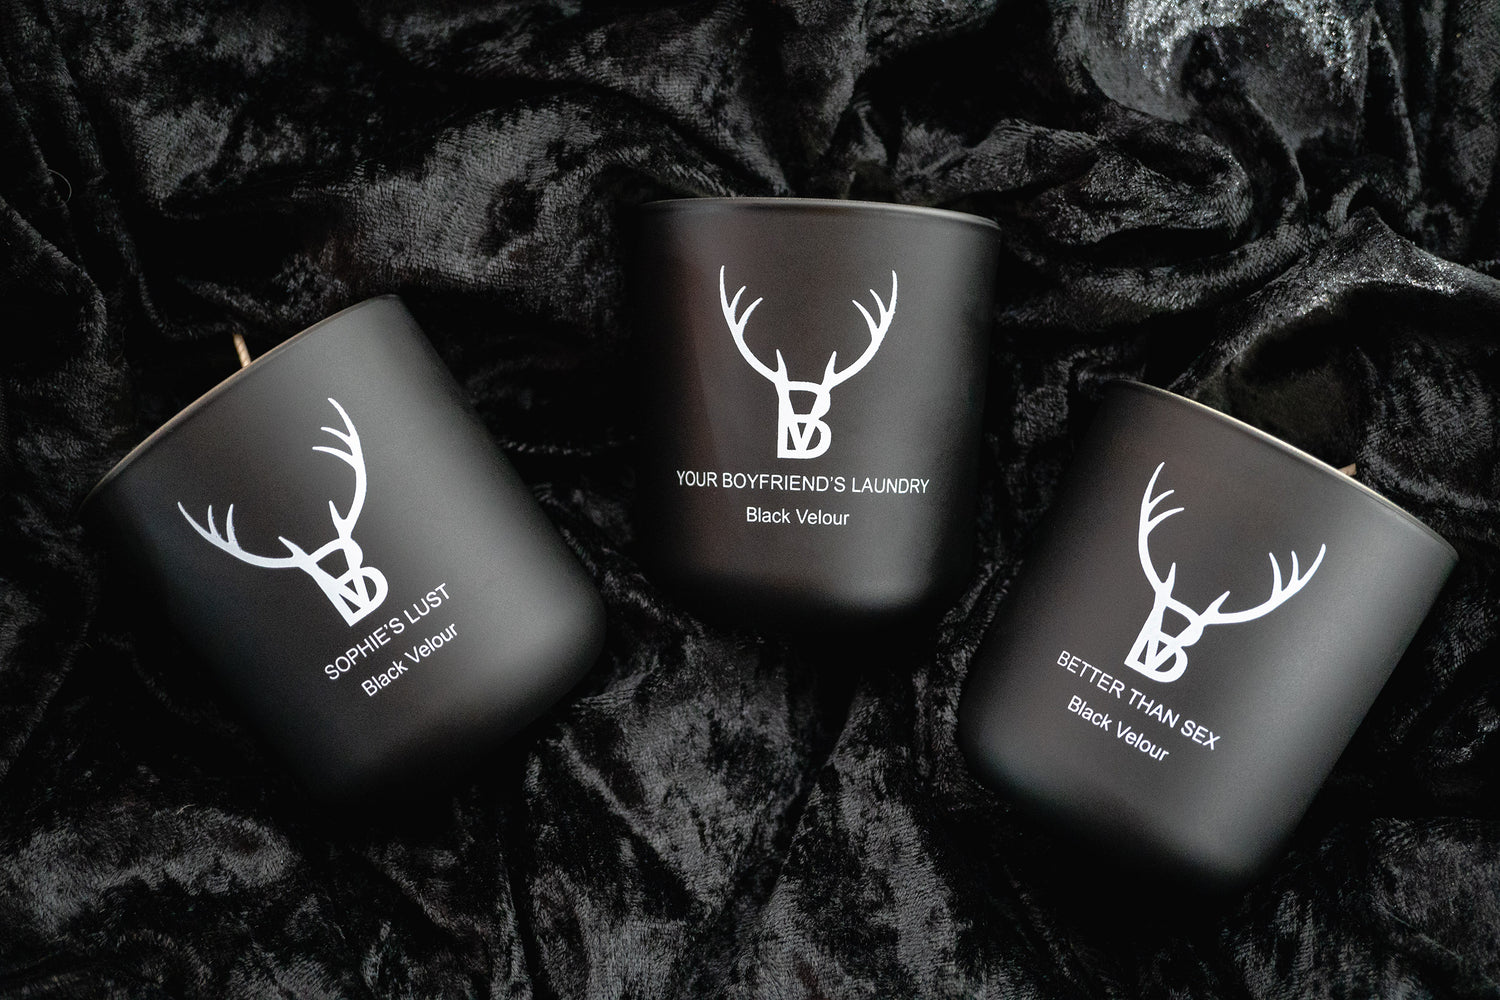 Handmade Soy Candles by Black Velour